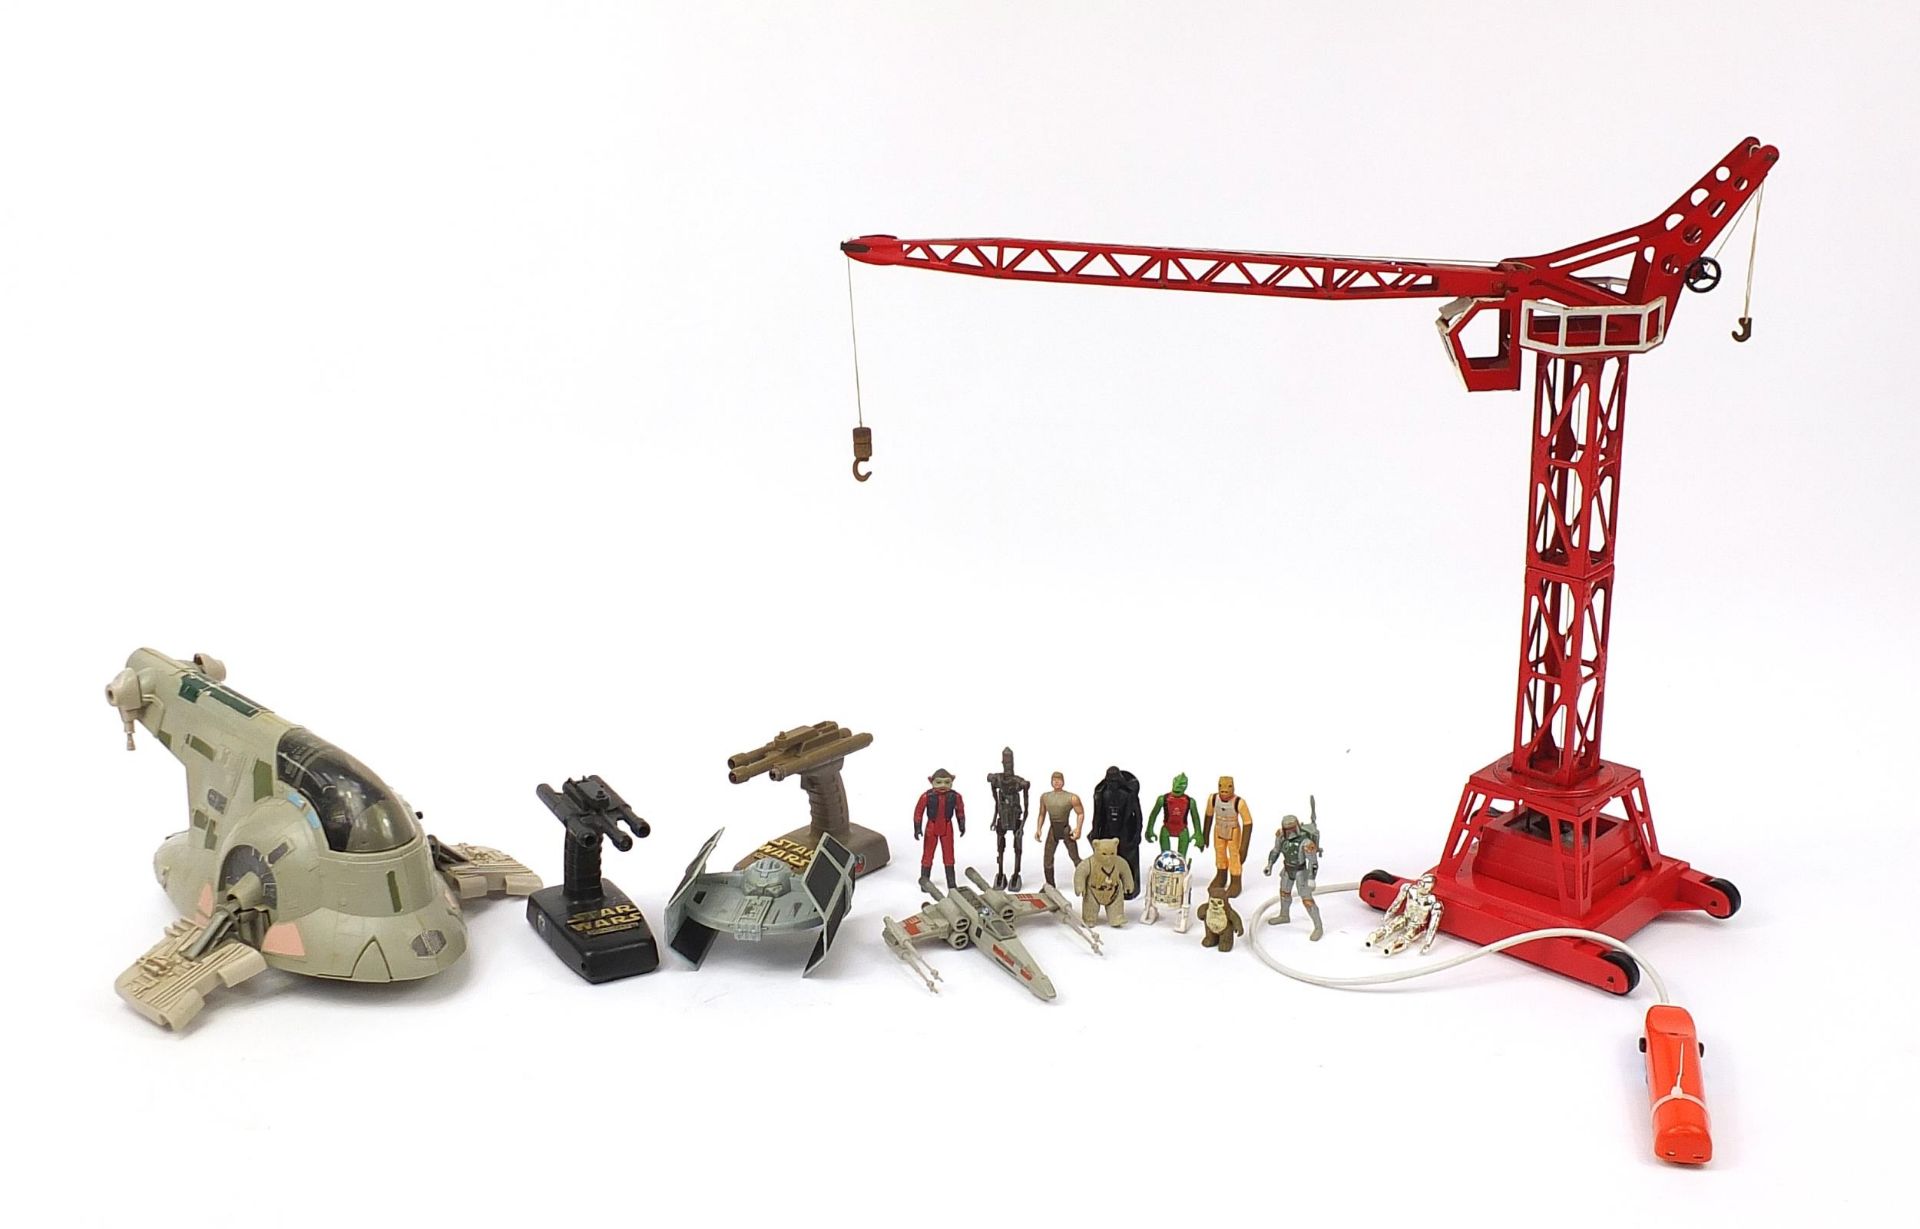 Vintage Star Wars figures and vehicles and a red Meccano design metal crane, the crane 60cm high